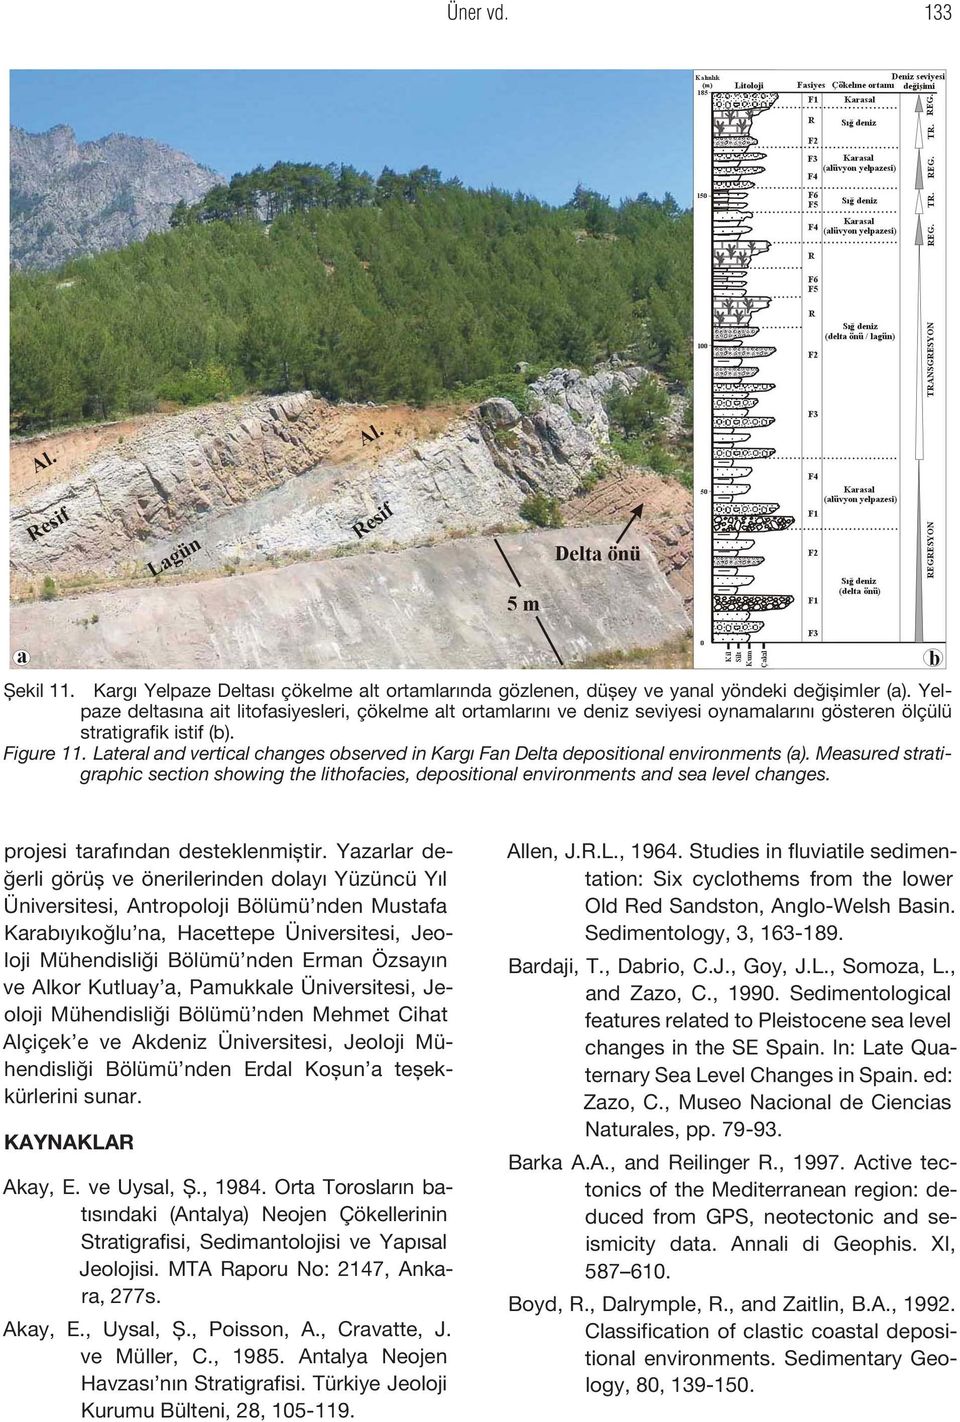 Lateral and vertical changes observed in Kargı Fan Delta depositional environments (a). Measured stratigraphic section showing the lithofacies, depositional environments and sea level changes.